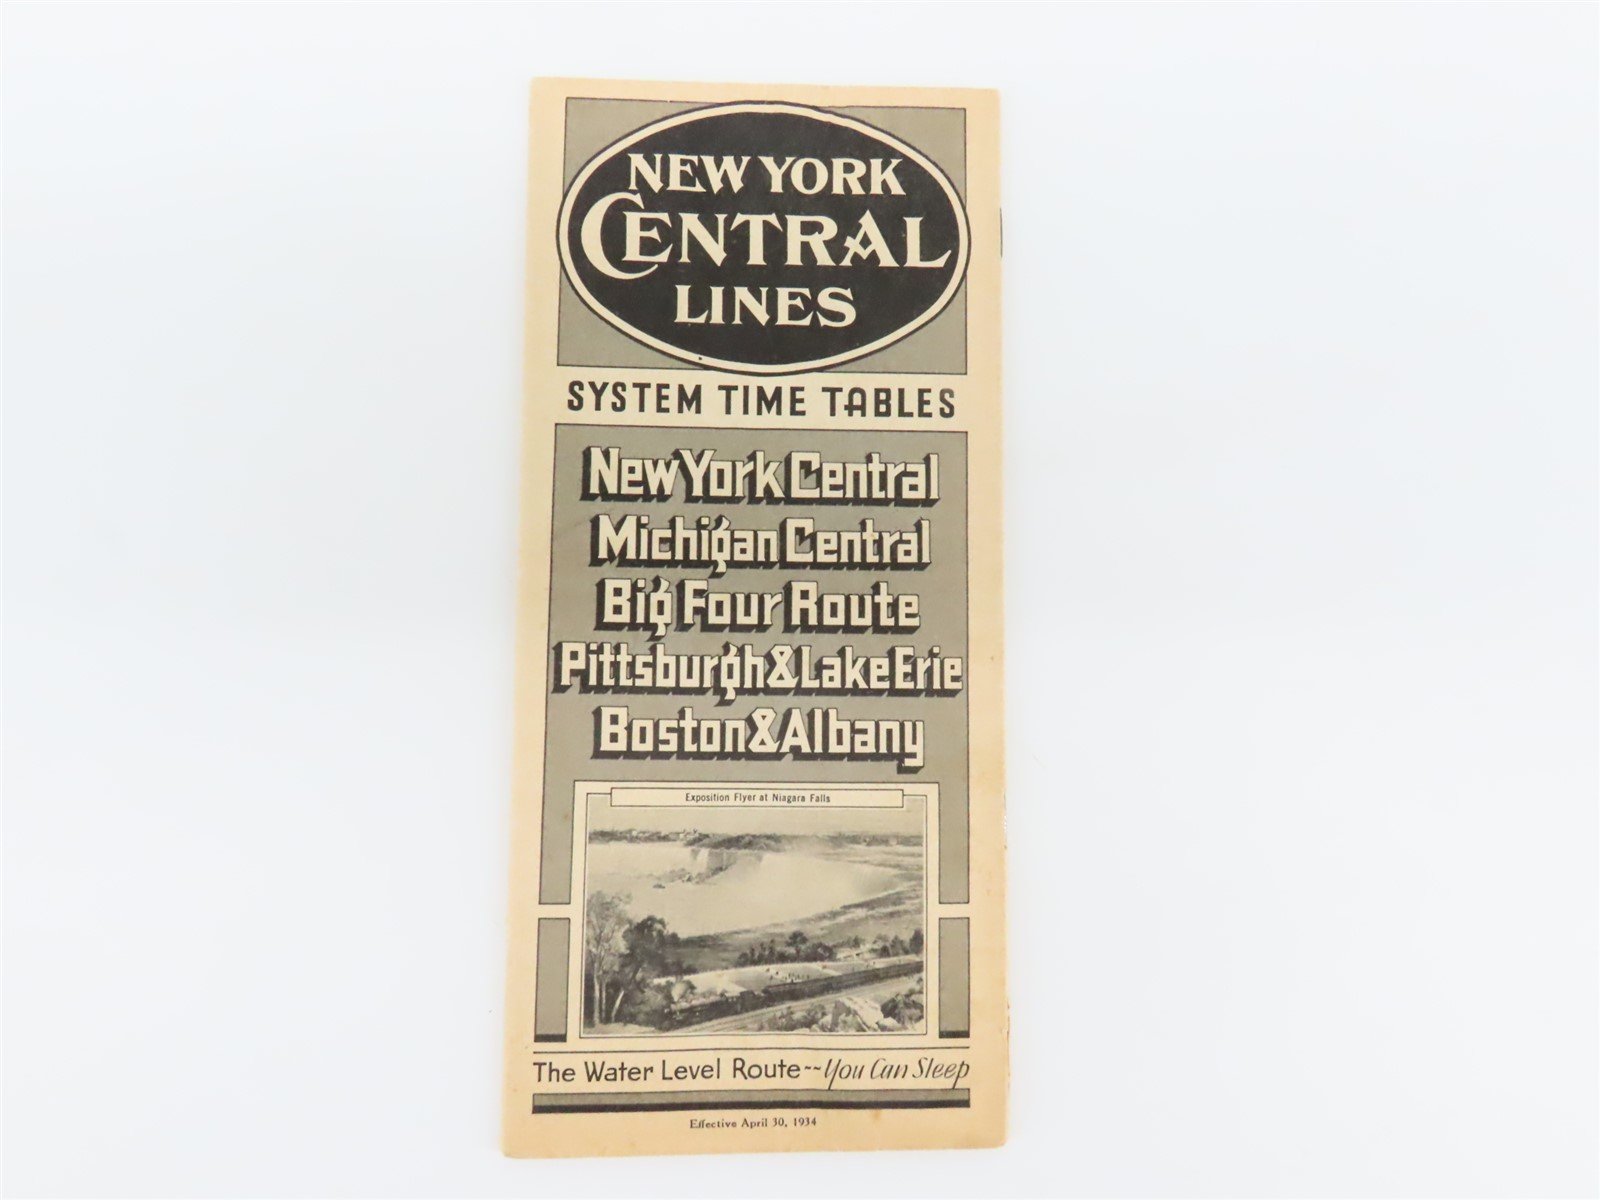 NYC New York Central Lines "The Water Level Route" Time Tables - April 30, 1934